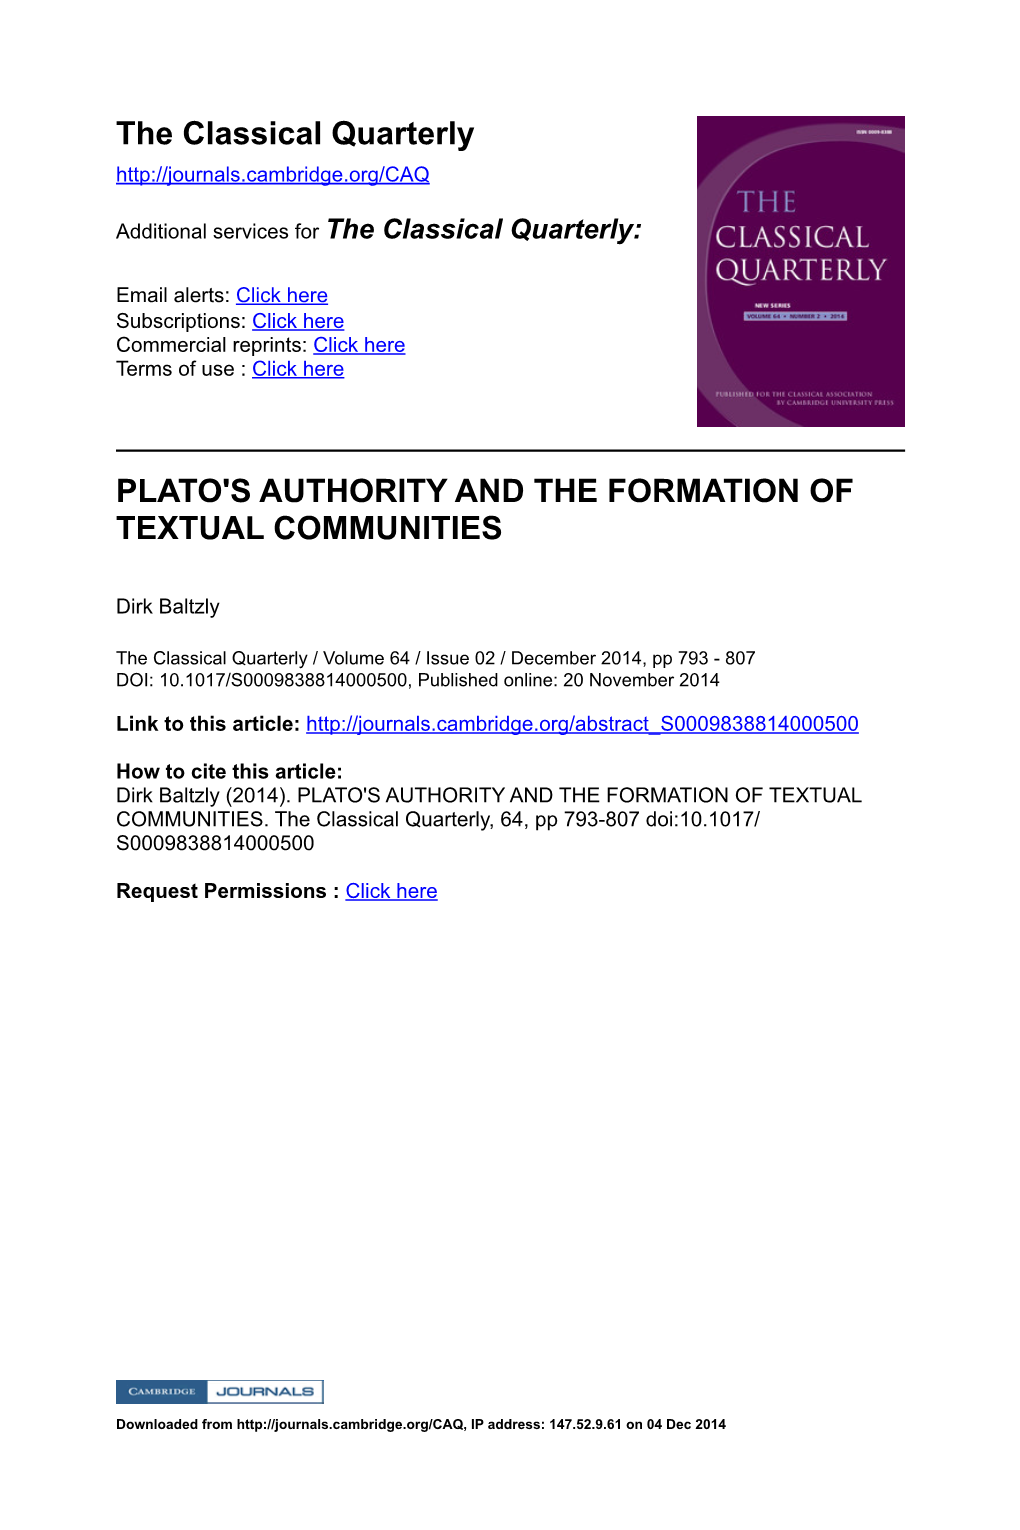 The Classical Quarterly PLATO's AUTHORITY and THE